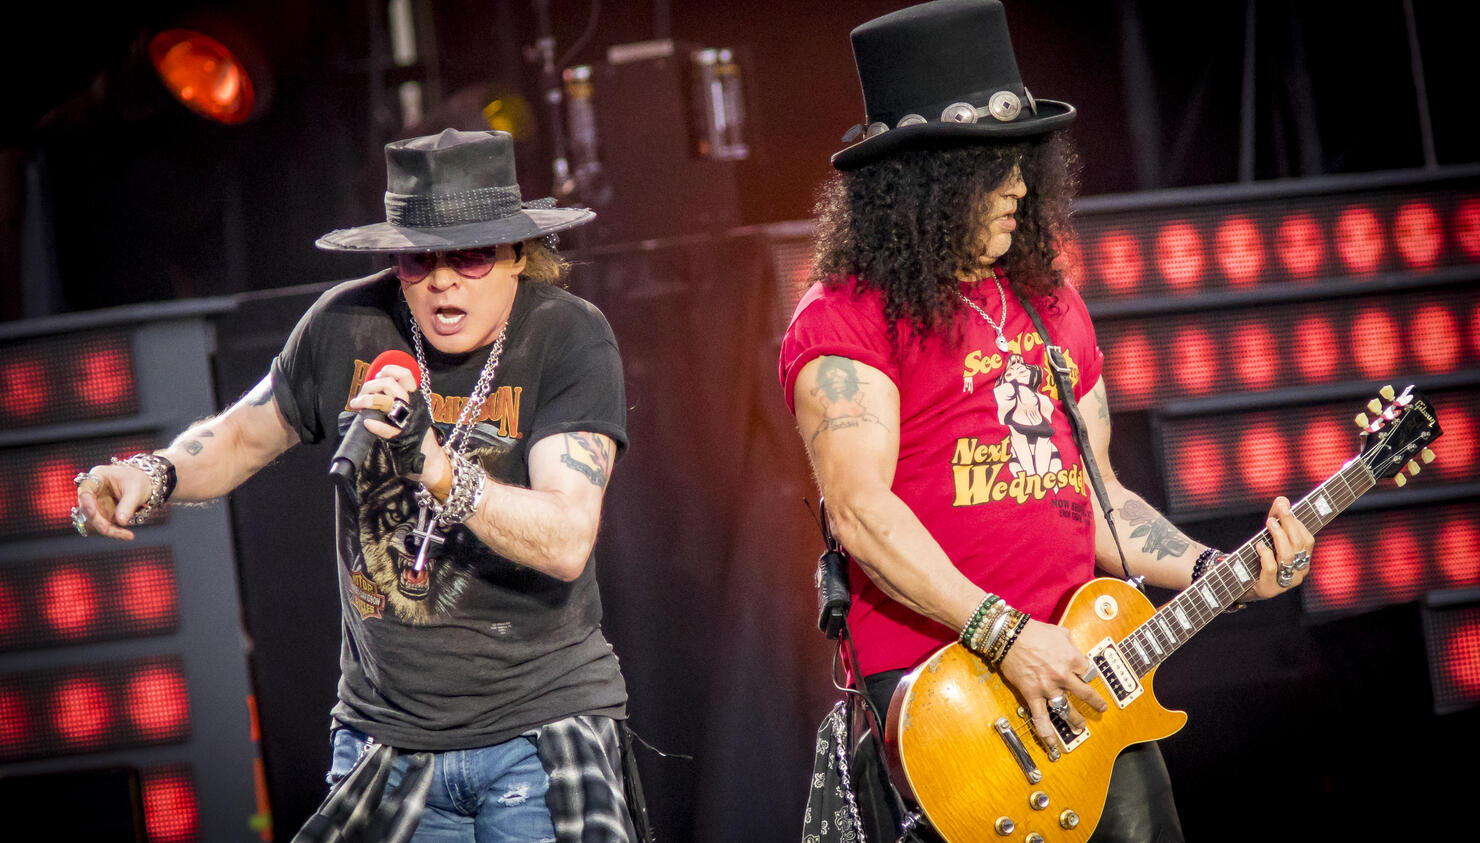 Guns N' Roses Last Tour Is Second Highest-Grossing Ever